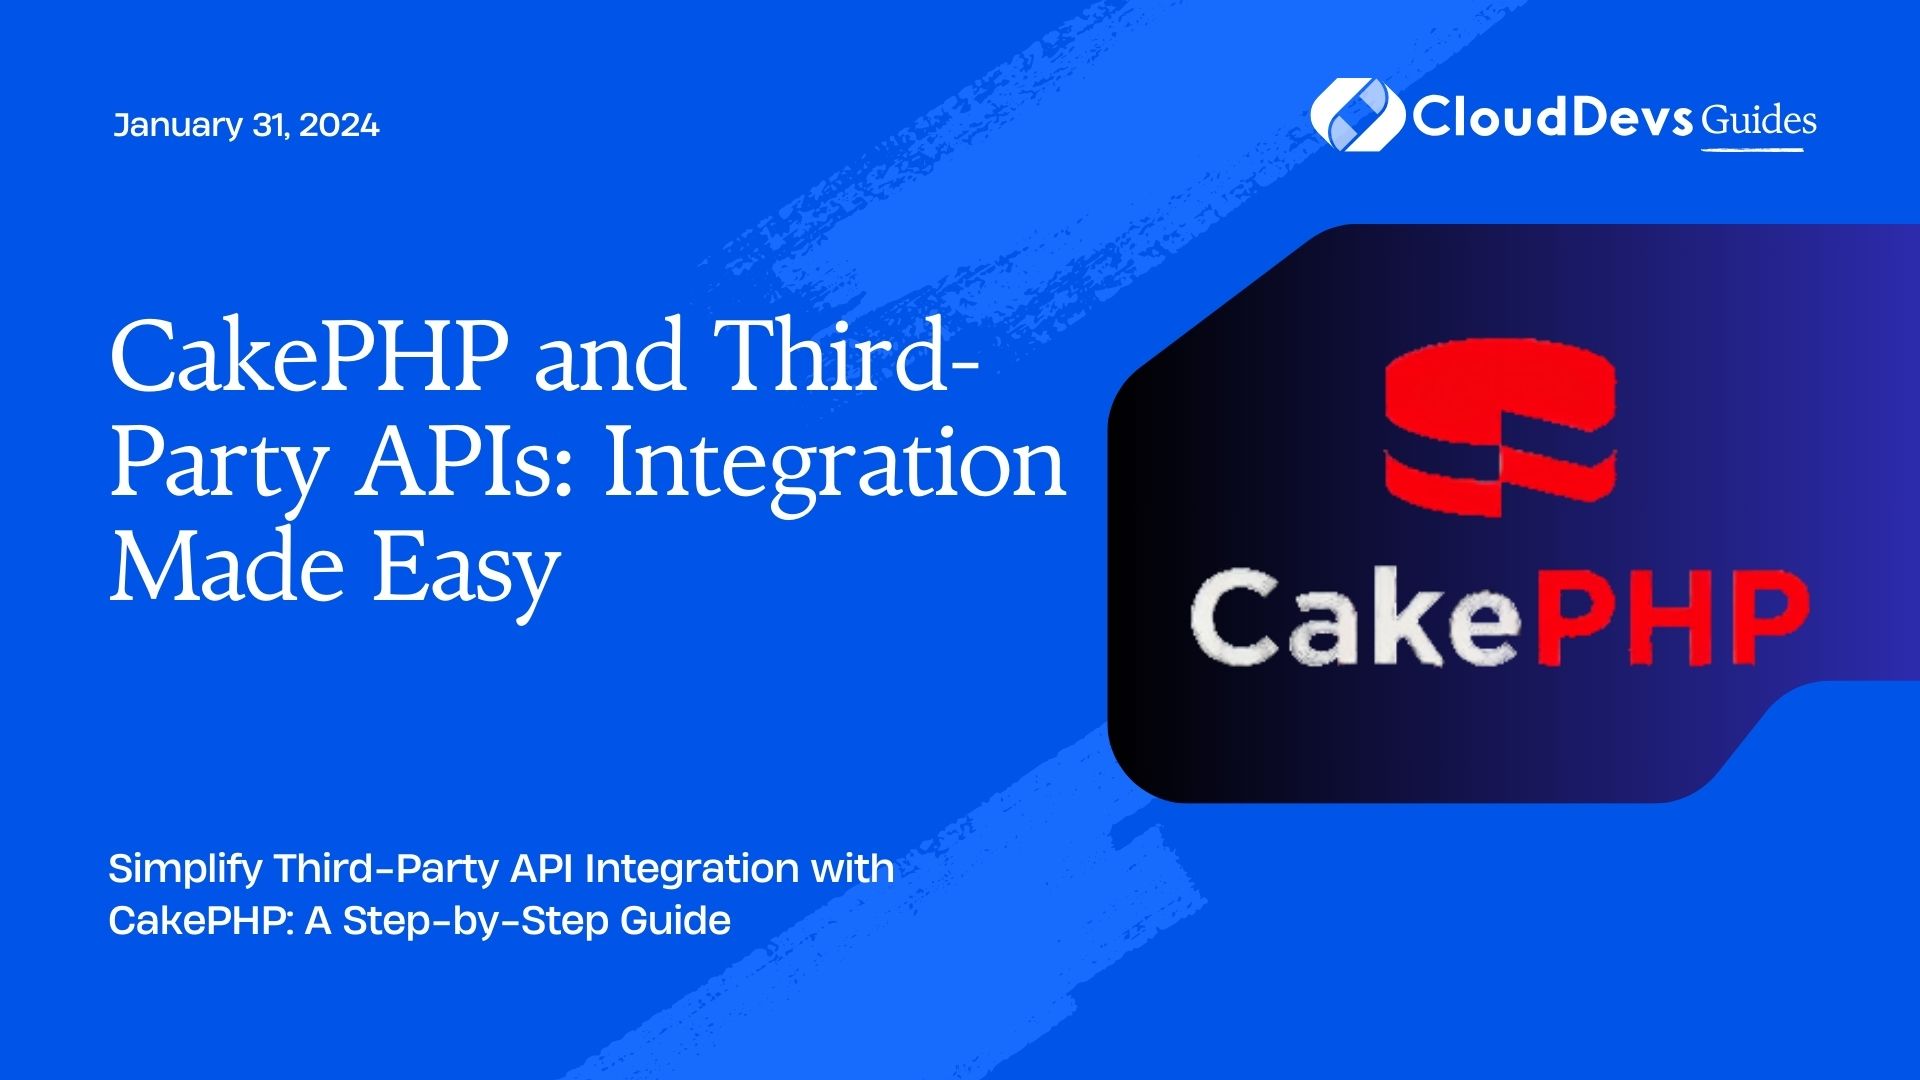 CakePHP and Third-Party APIs: Integration Made Easy